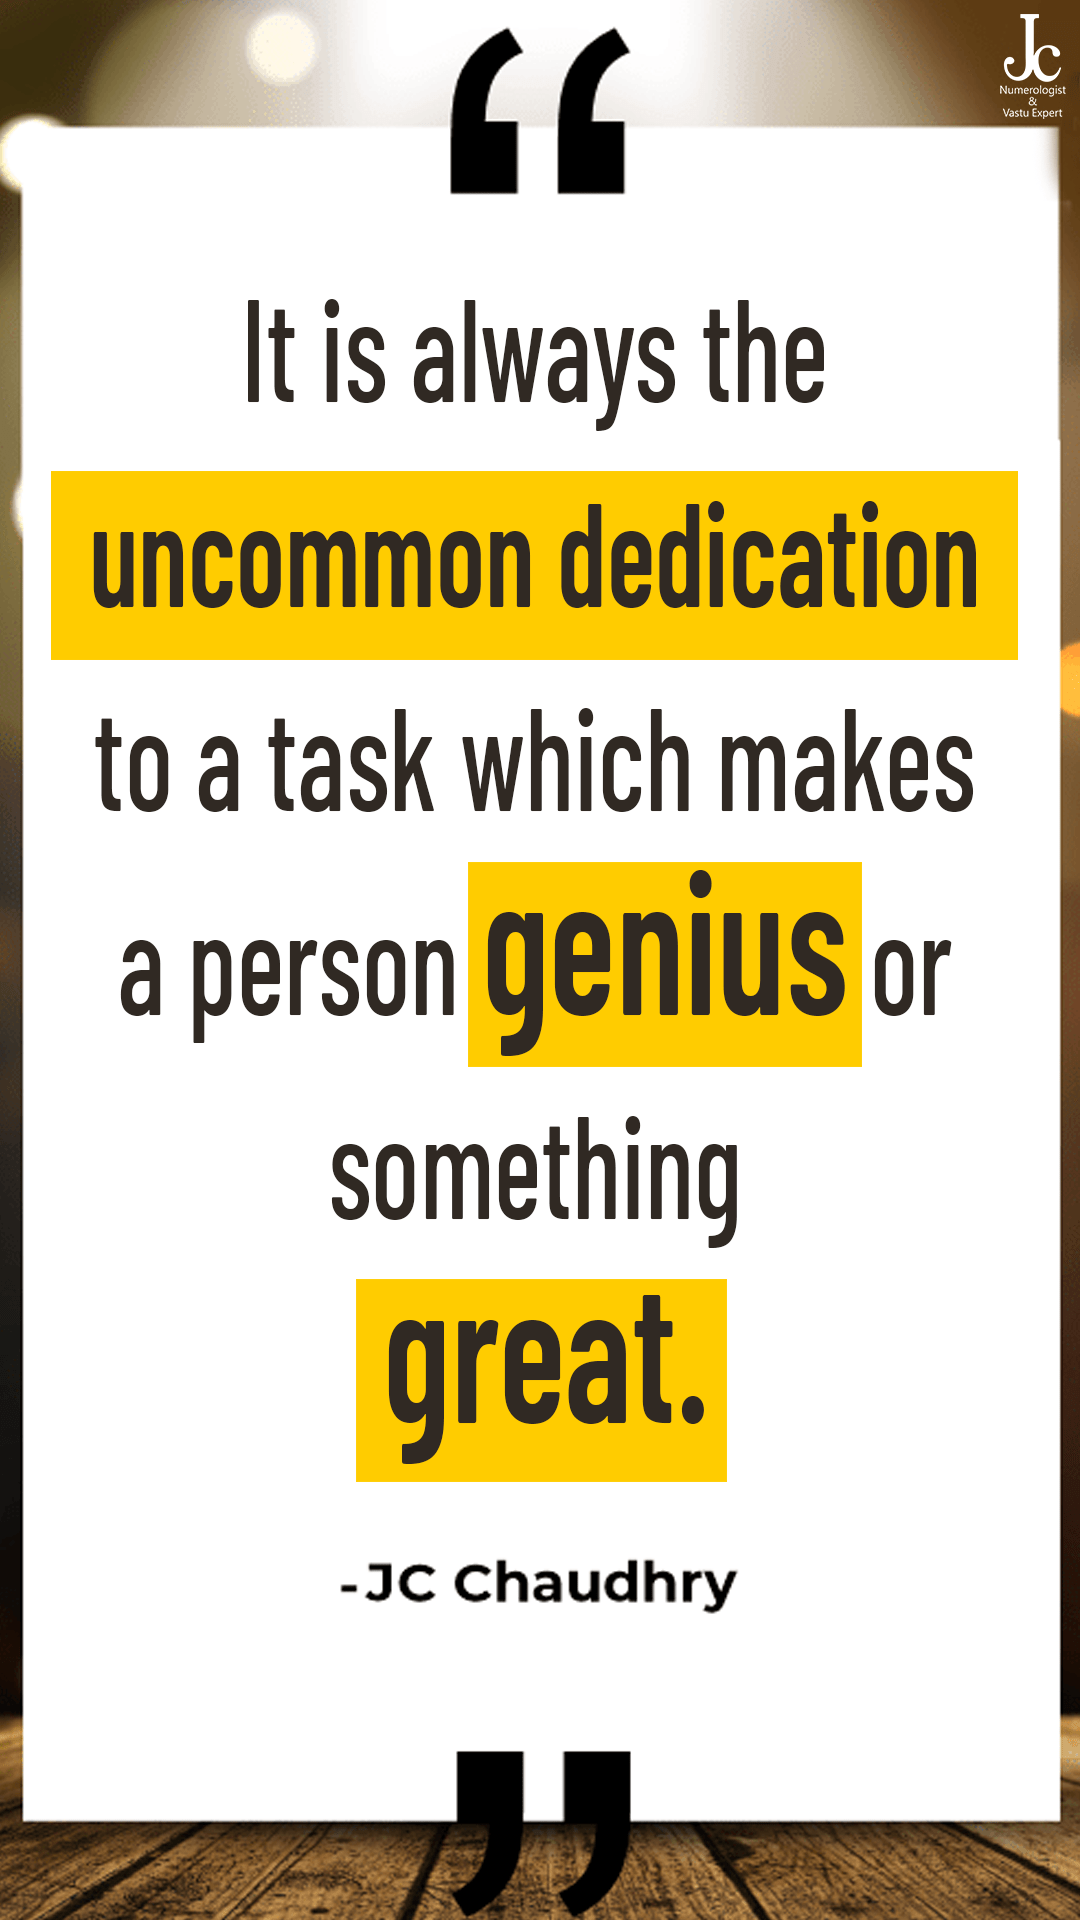 “It is always the uncommon dedication to a task which makes a person genius or something great.